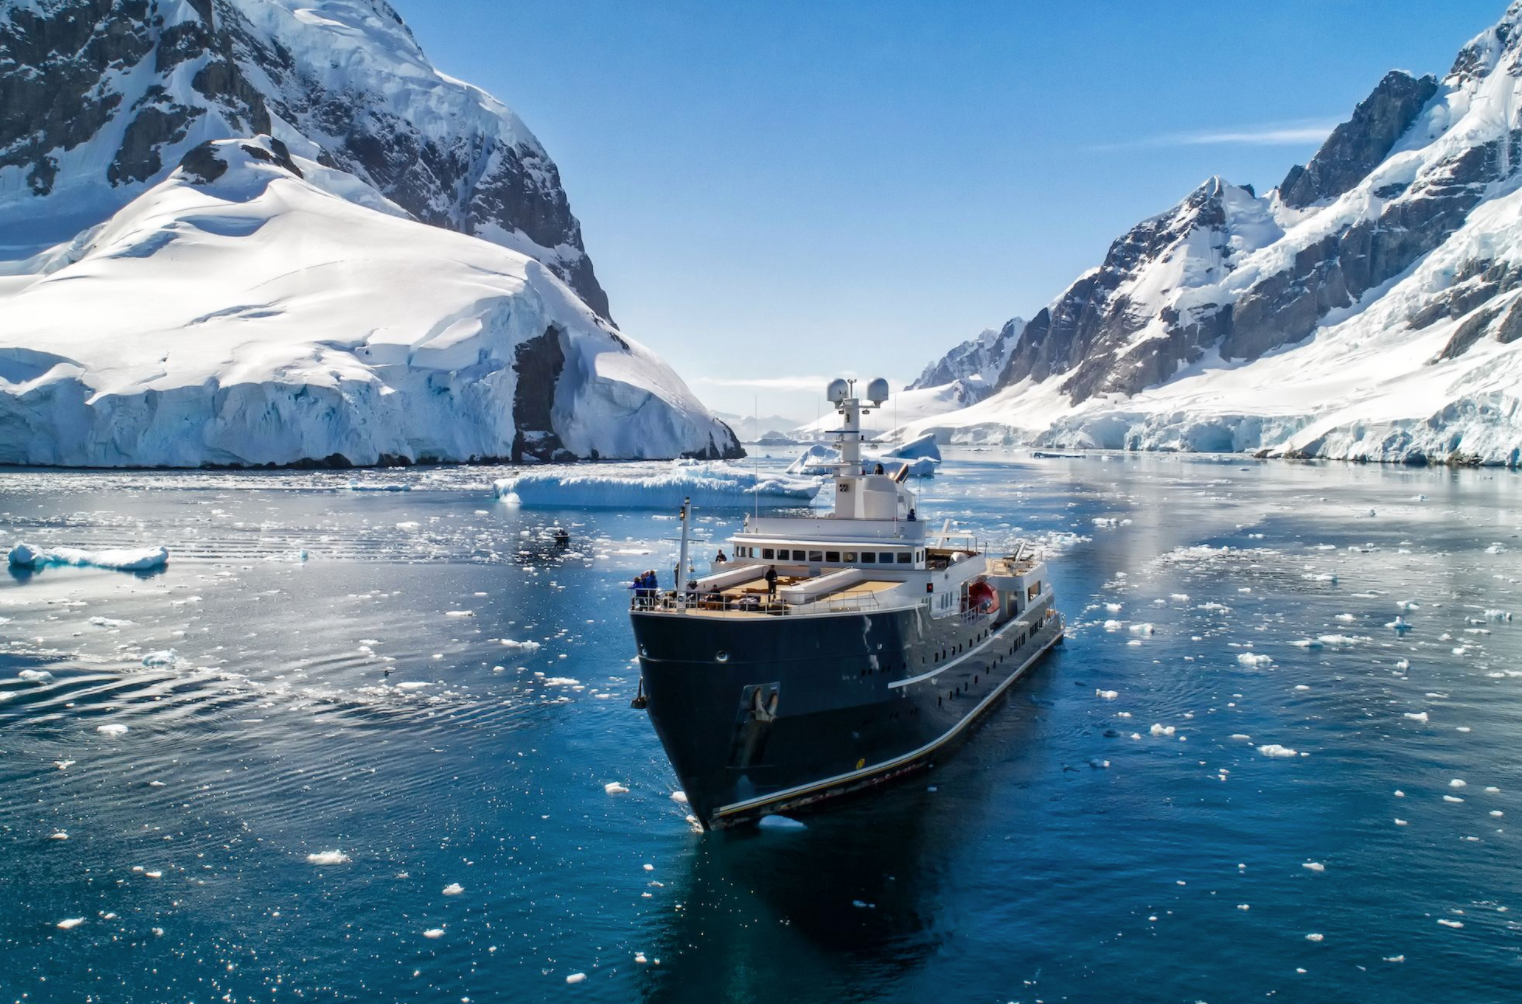 Charter an Icebreaker Yacht For an Epic Arctic Circle Tour